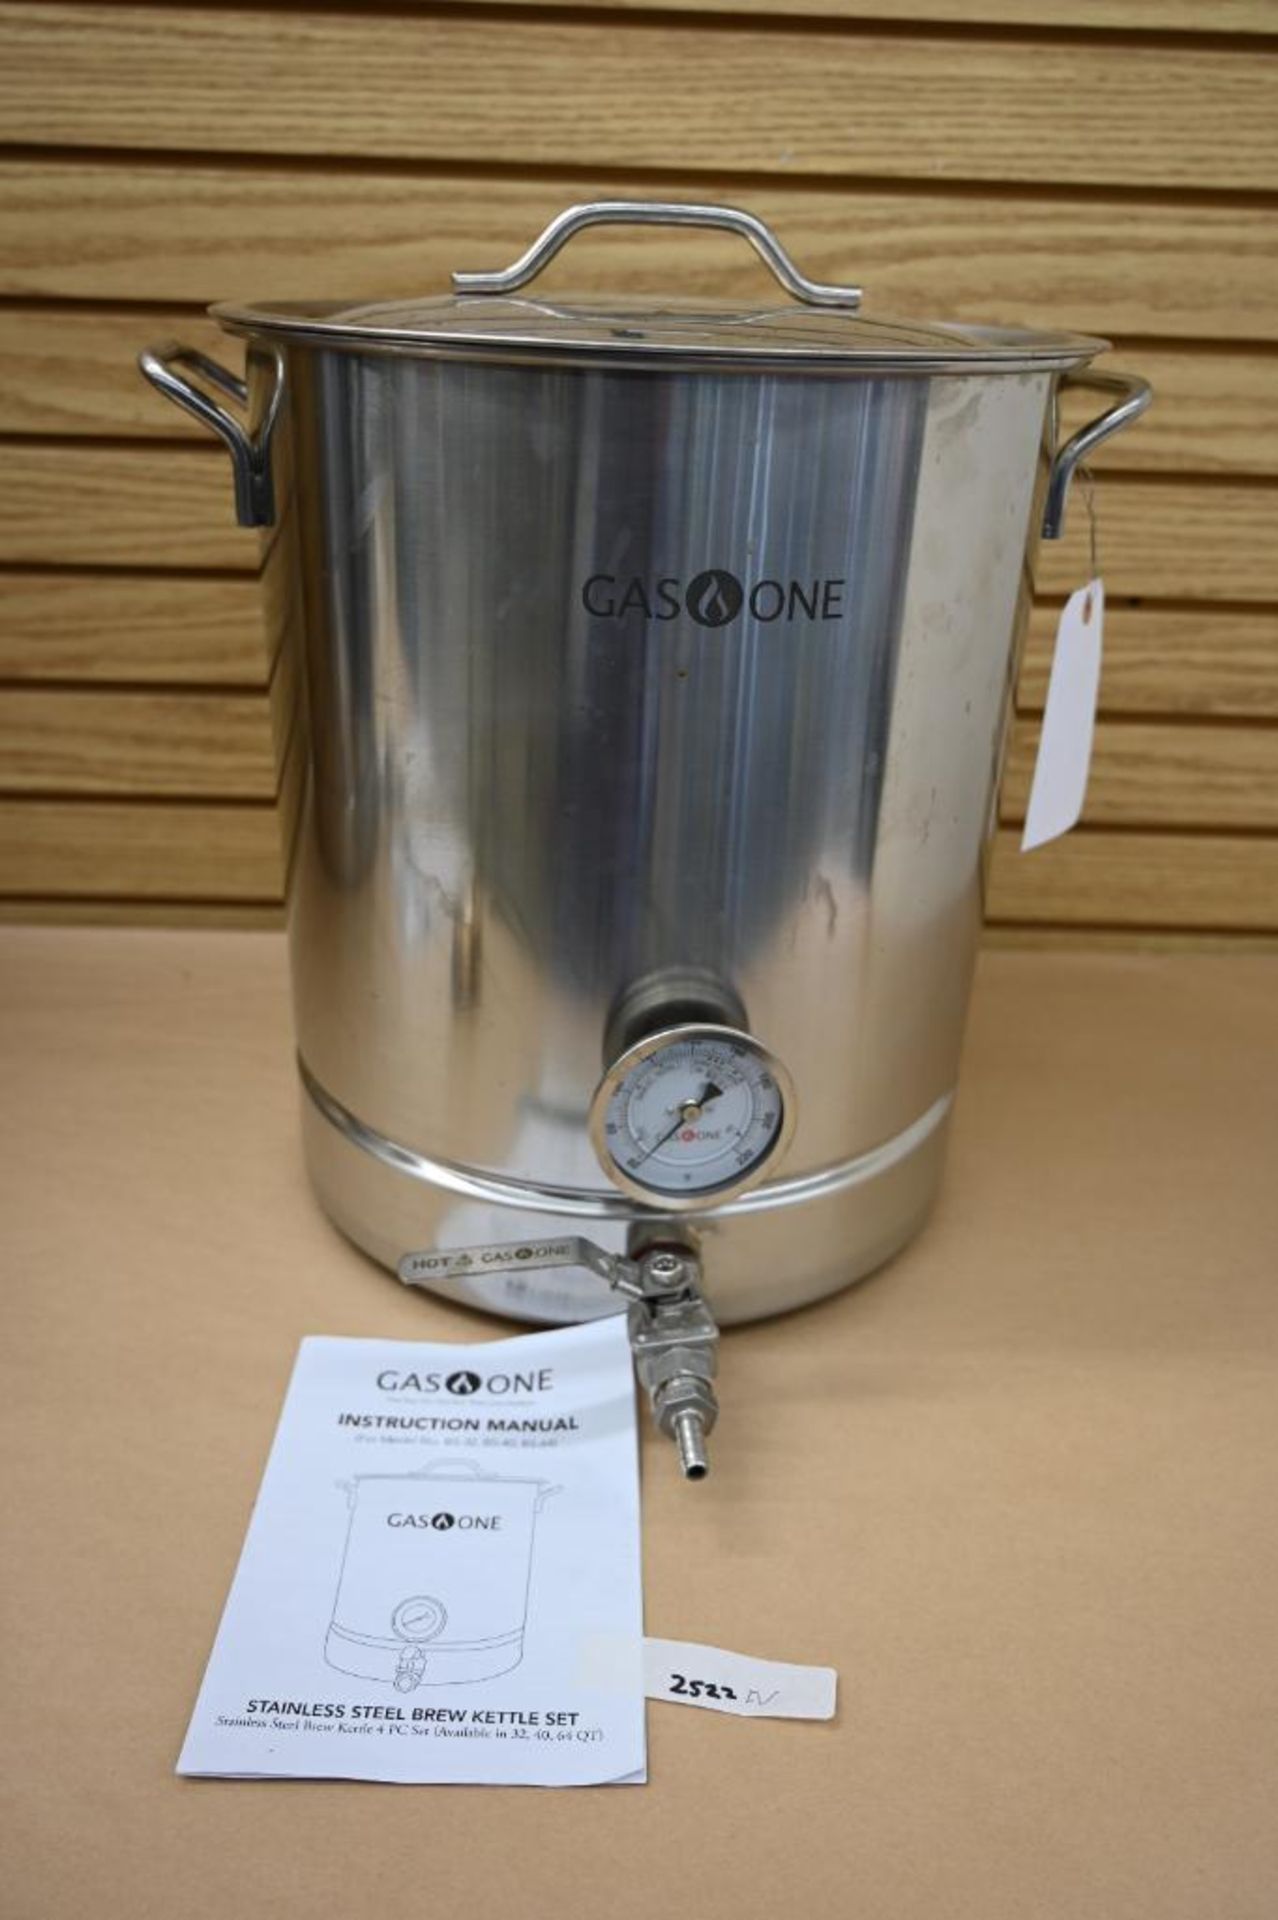 Gas One Stainless Steel Brew Kettle with Lid - Image 2 of 5